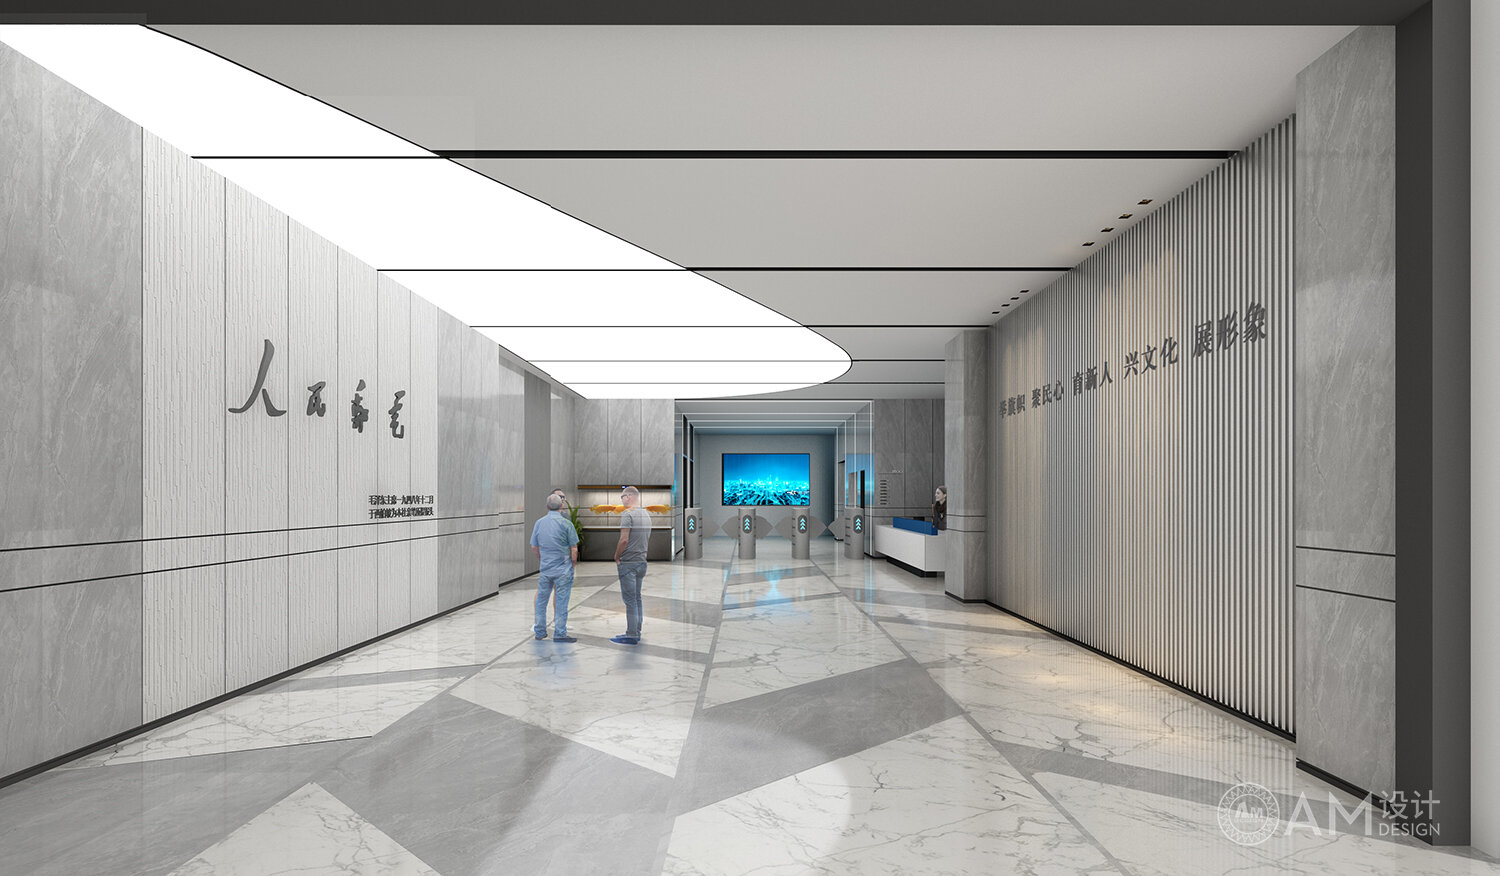 AM DESIGN | Front Hall & Entrance Design of Beijing People's Post and Telecommunications Office